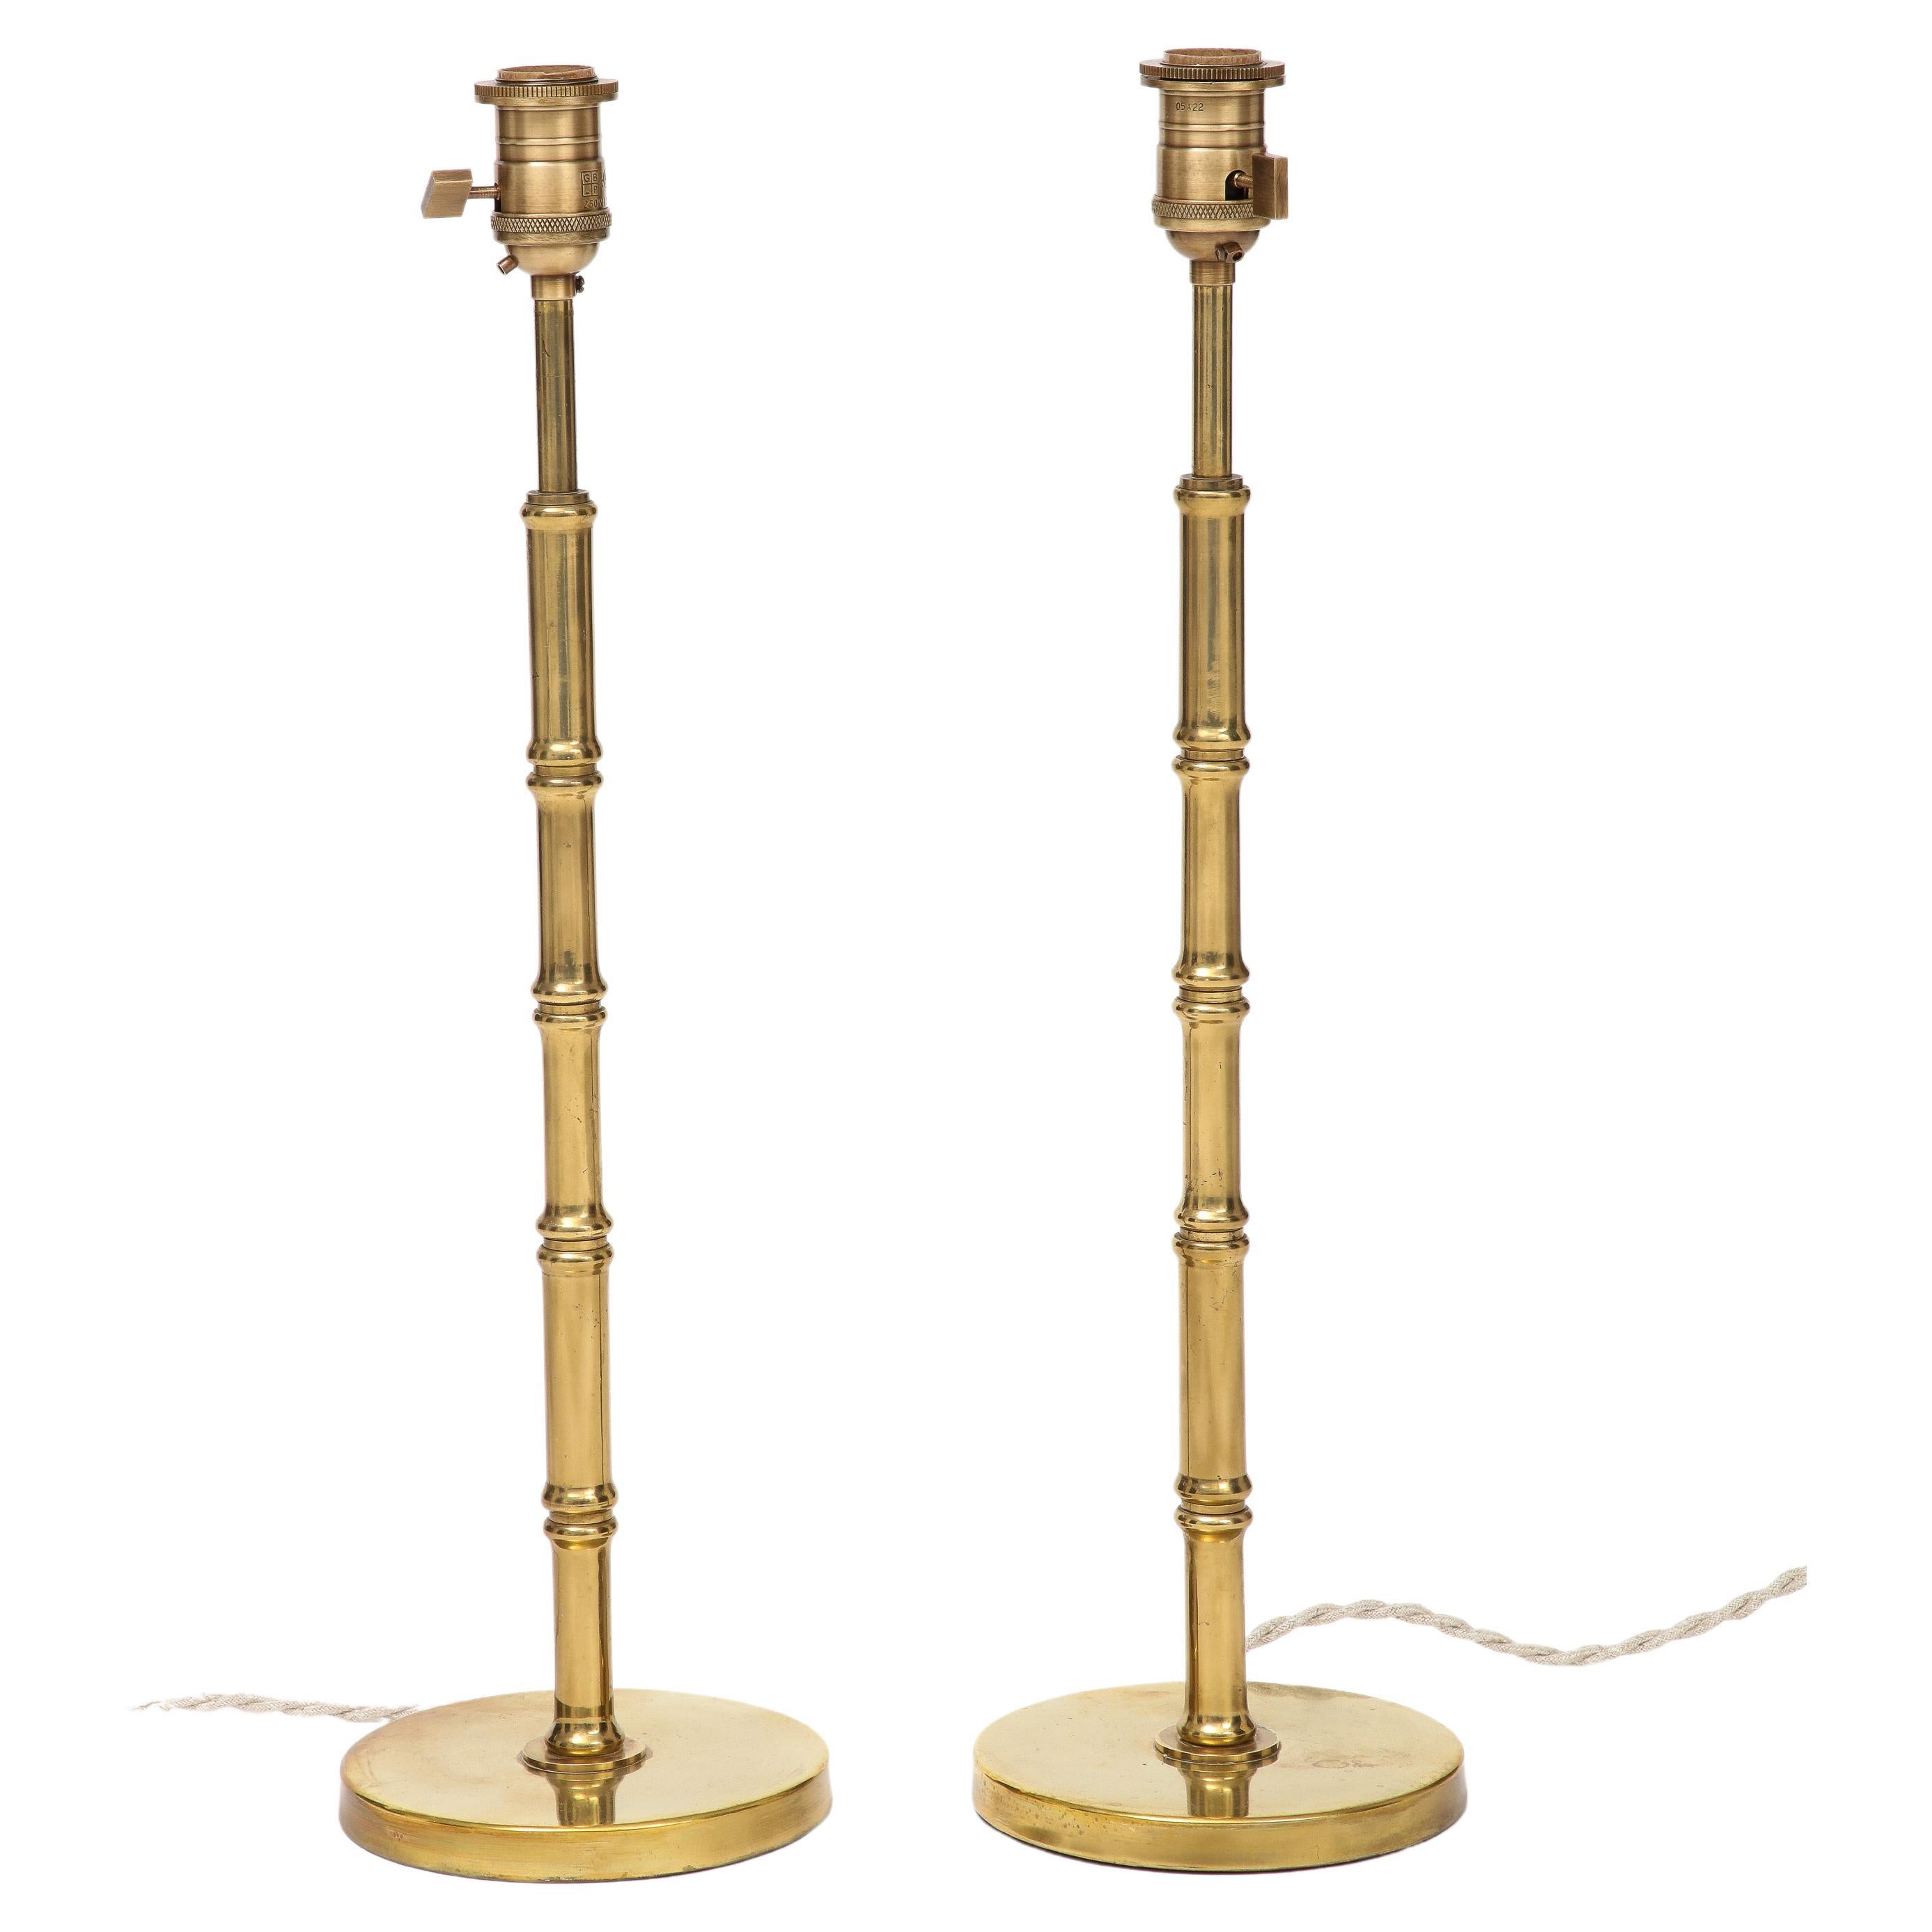 A pair of midcentury French brass table lamps, in the style of Baguès. Circa 1960s. Rewired for use in the US. Switch on socket. Weighted base. Minor dent on the base of one of the lamps.